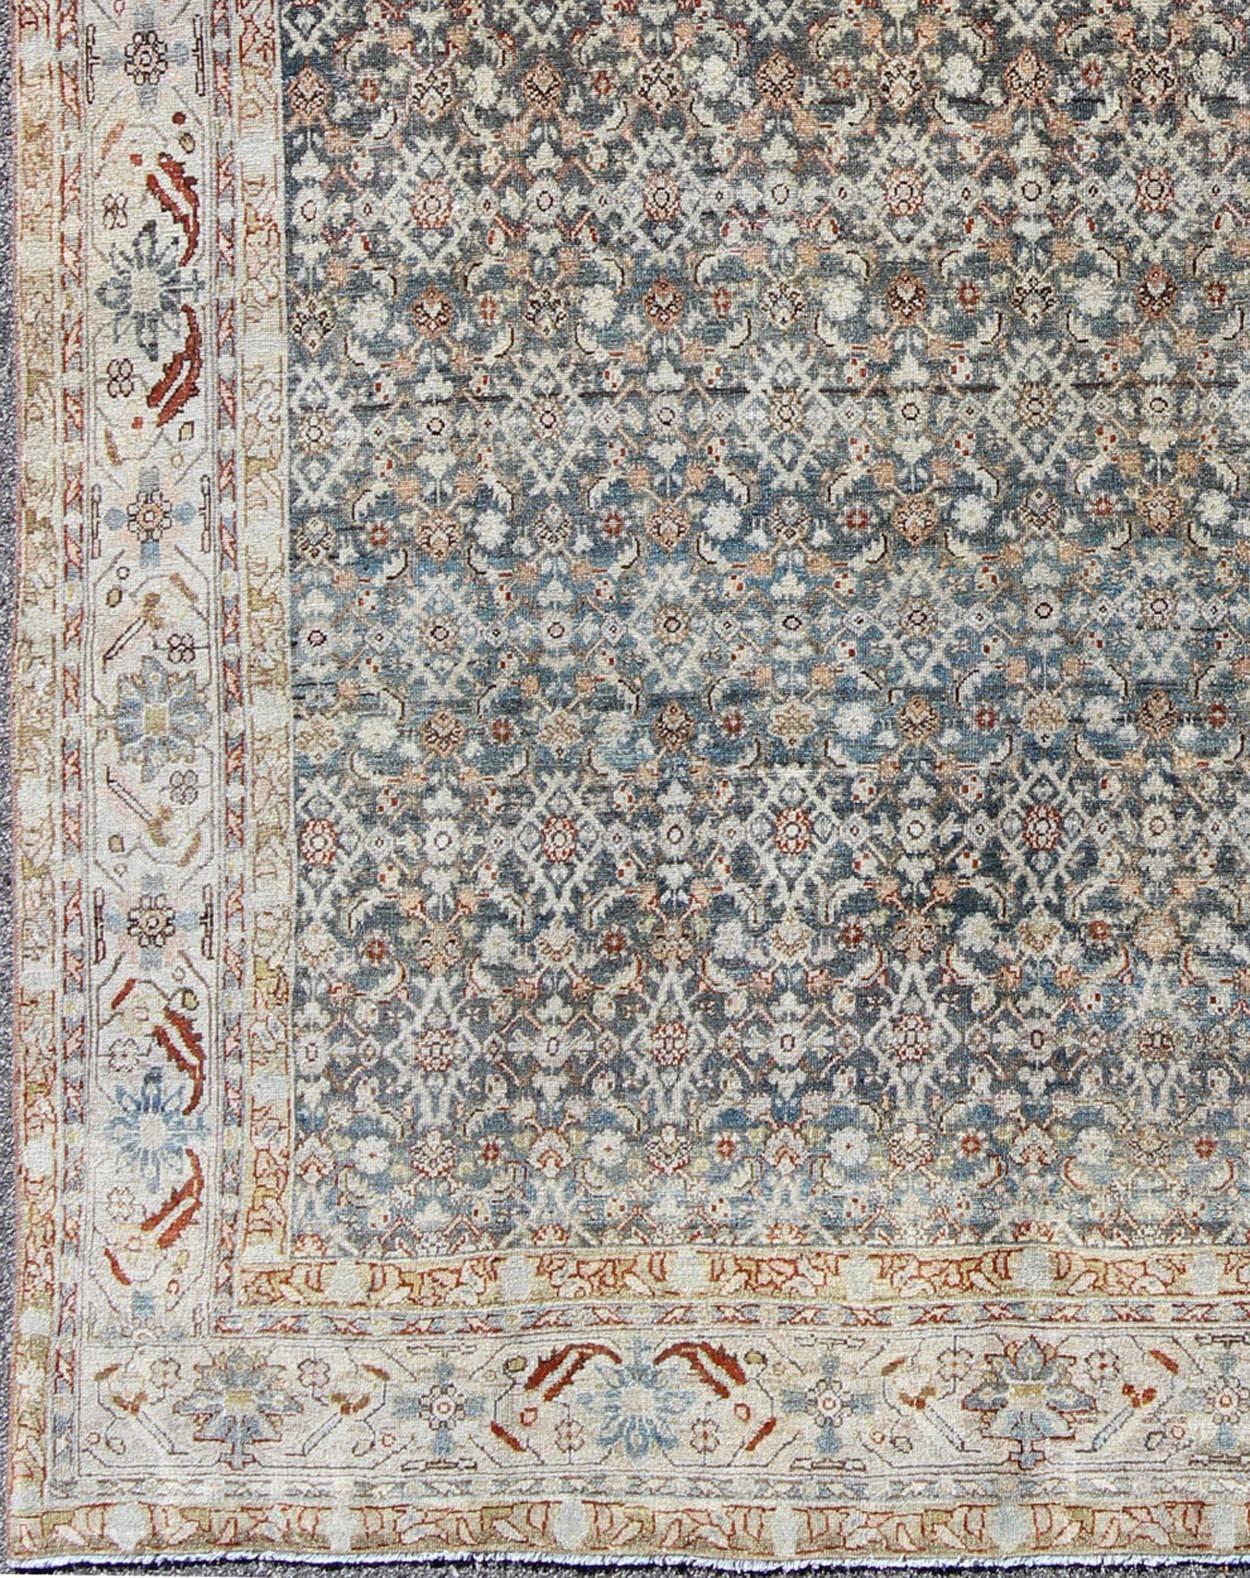 Antique Persian Malayer Rug with all over Herati design in steel Blue, Gray, Teal, light blue, red & Ivory.  SUS-163,  Antique distressed rug Persian destressed rug Antique Persian distressed Malayer 

This distressed antique Persian Malayer rug was